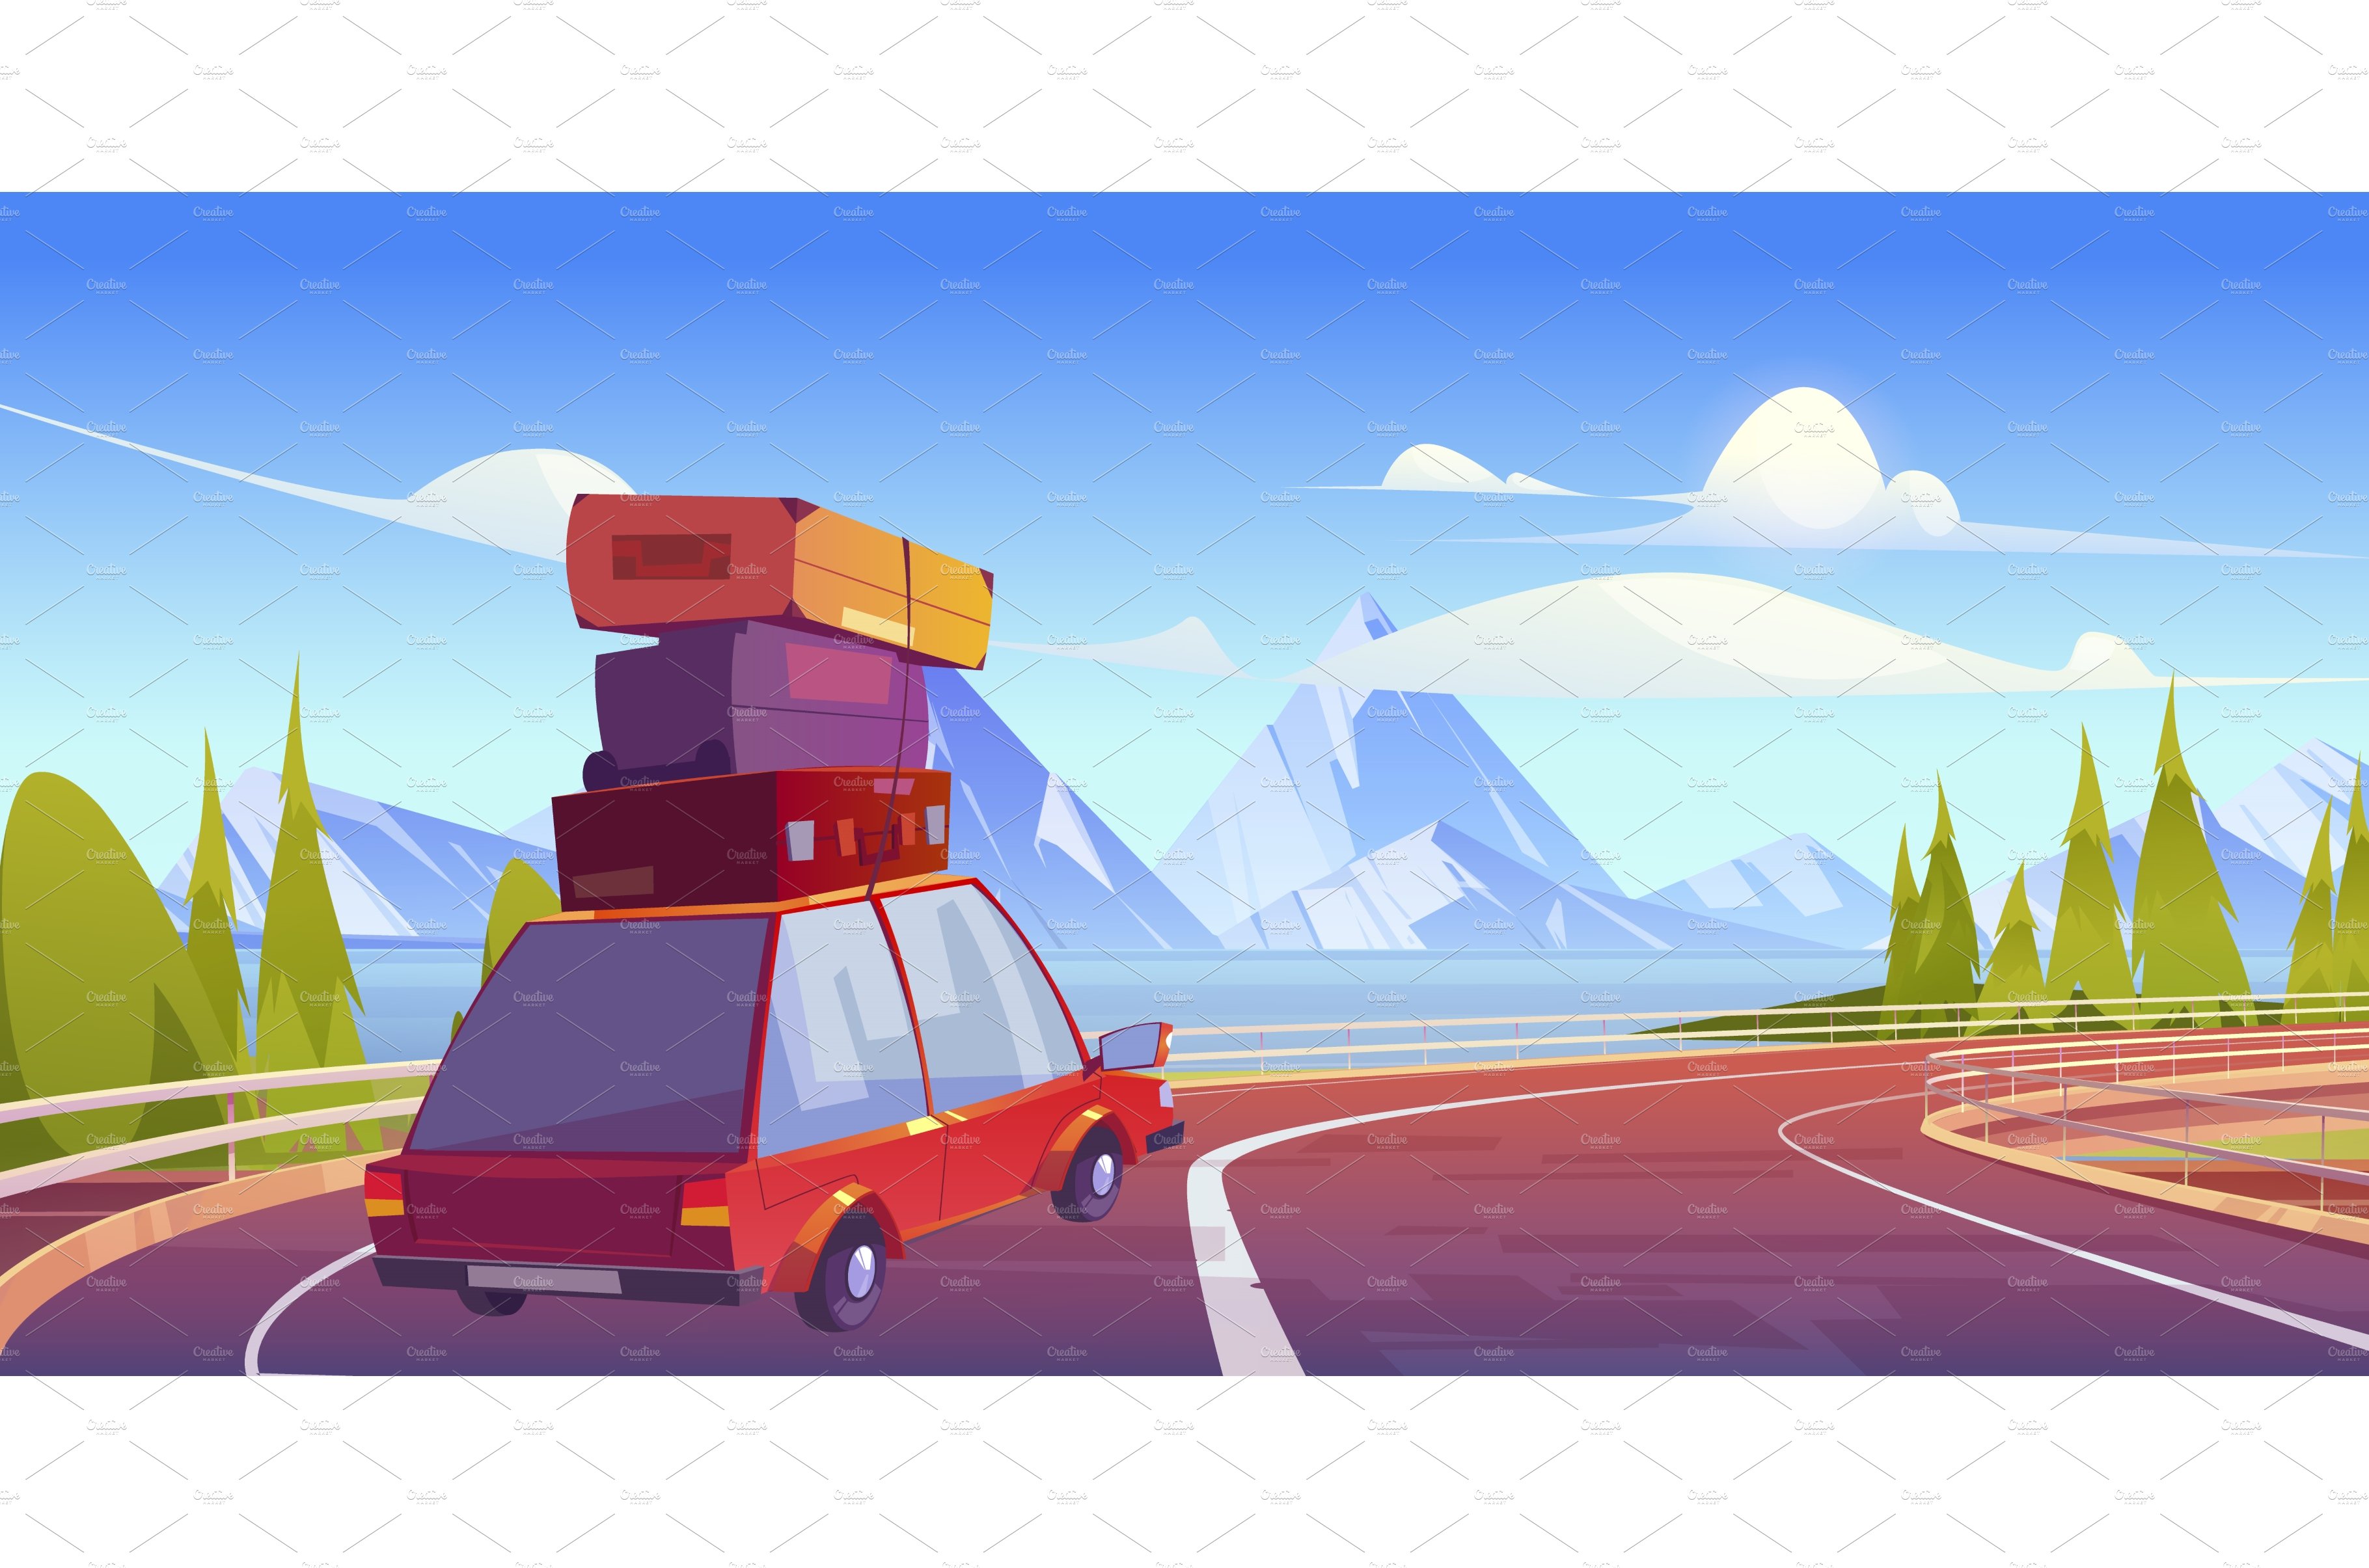 Car with luggage on roof drive on cover image.